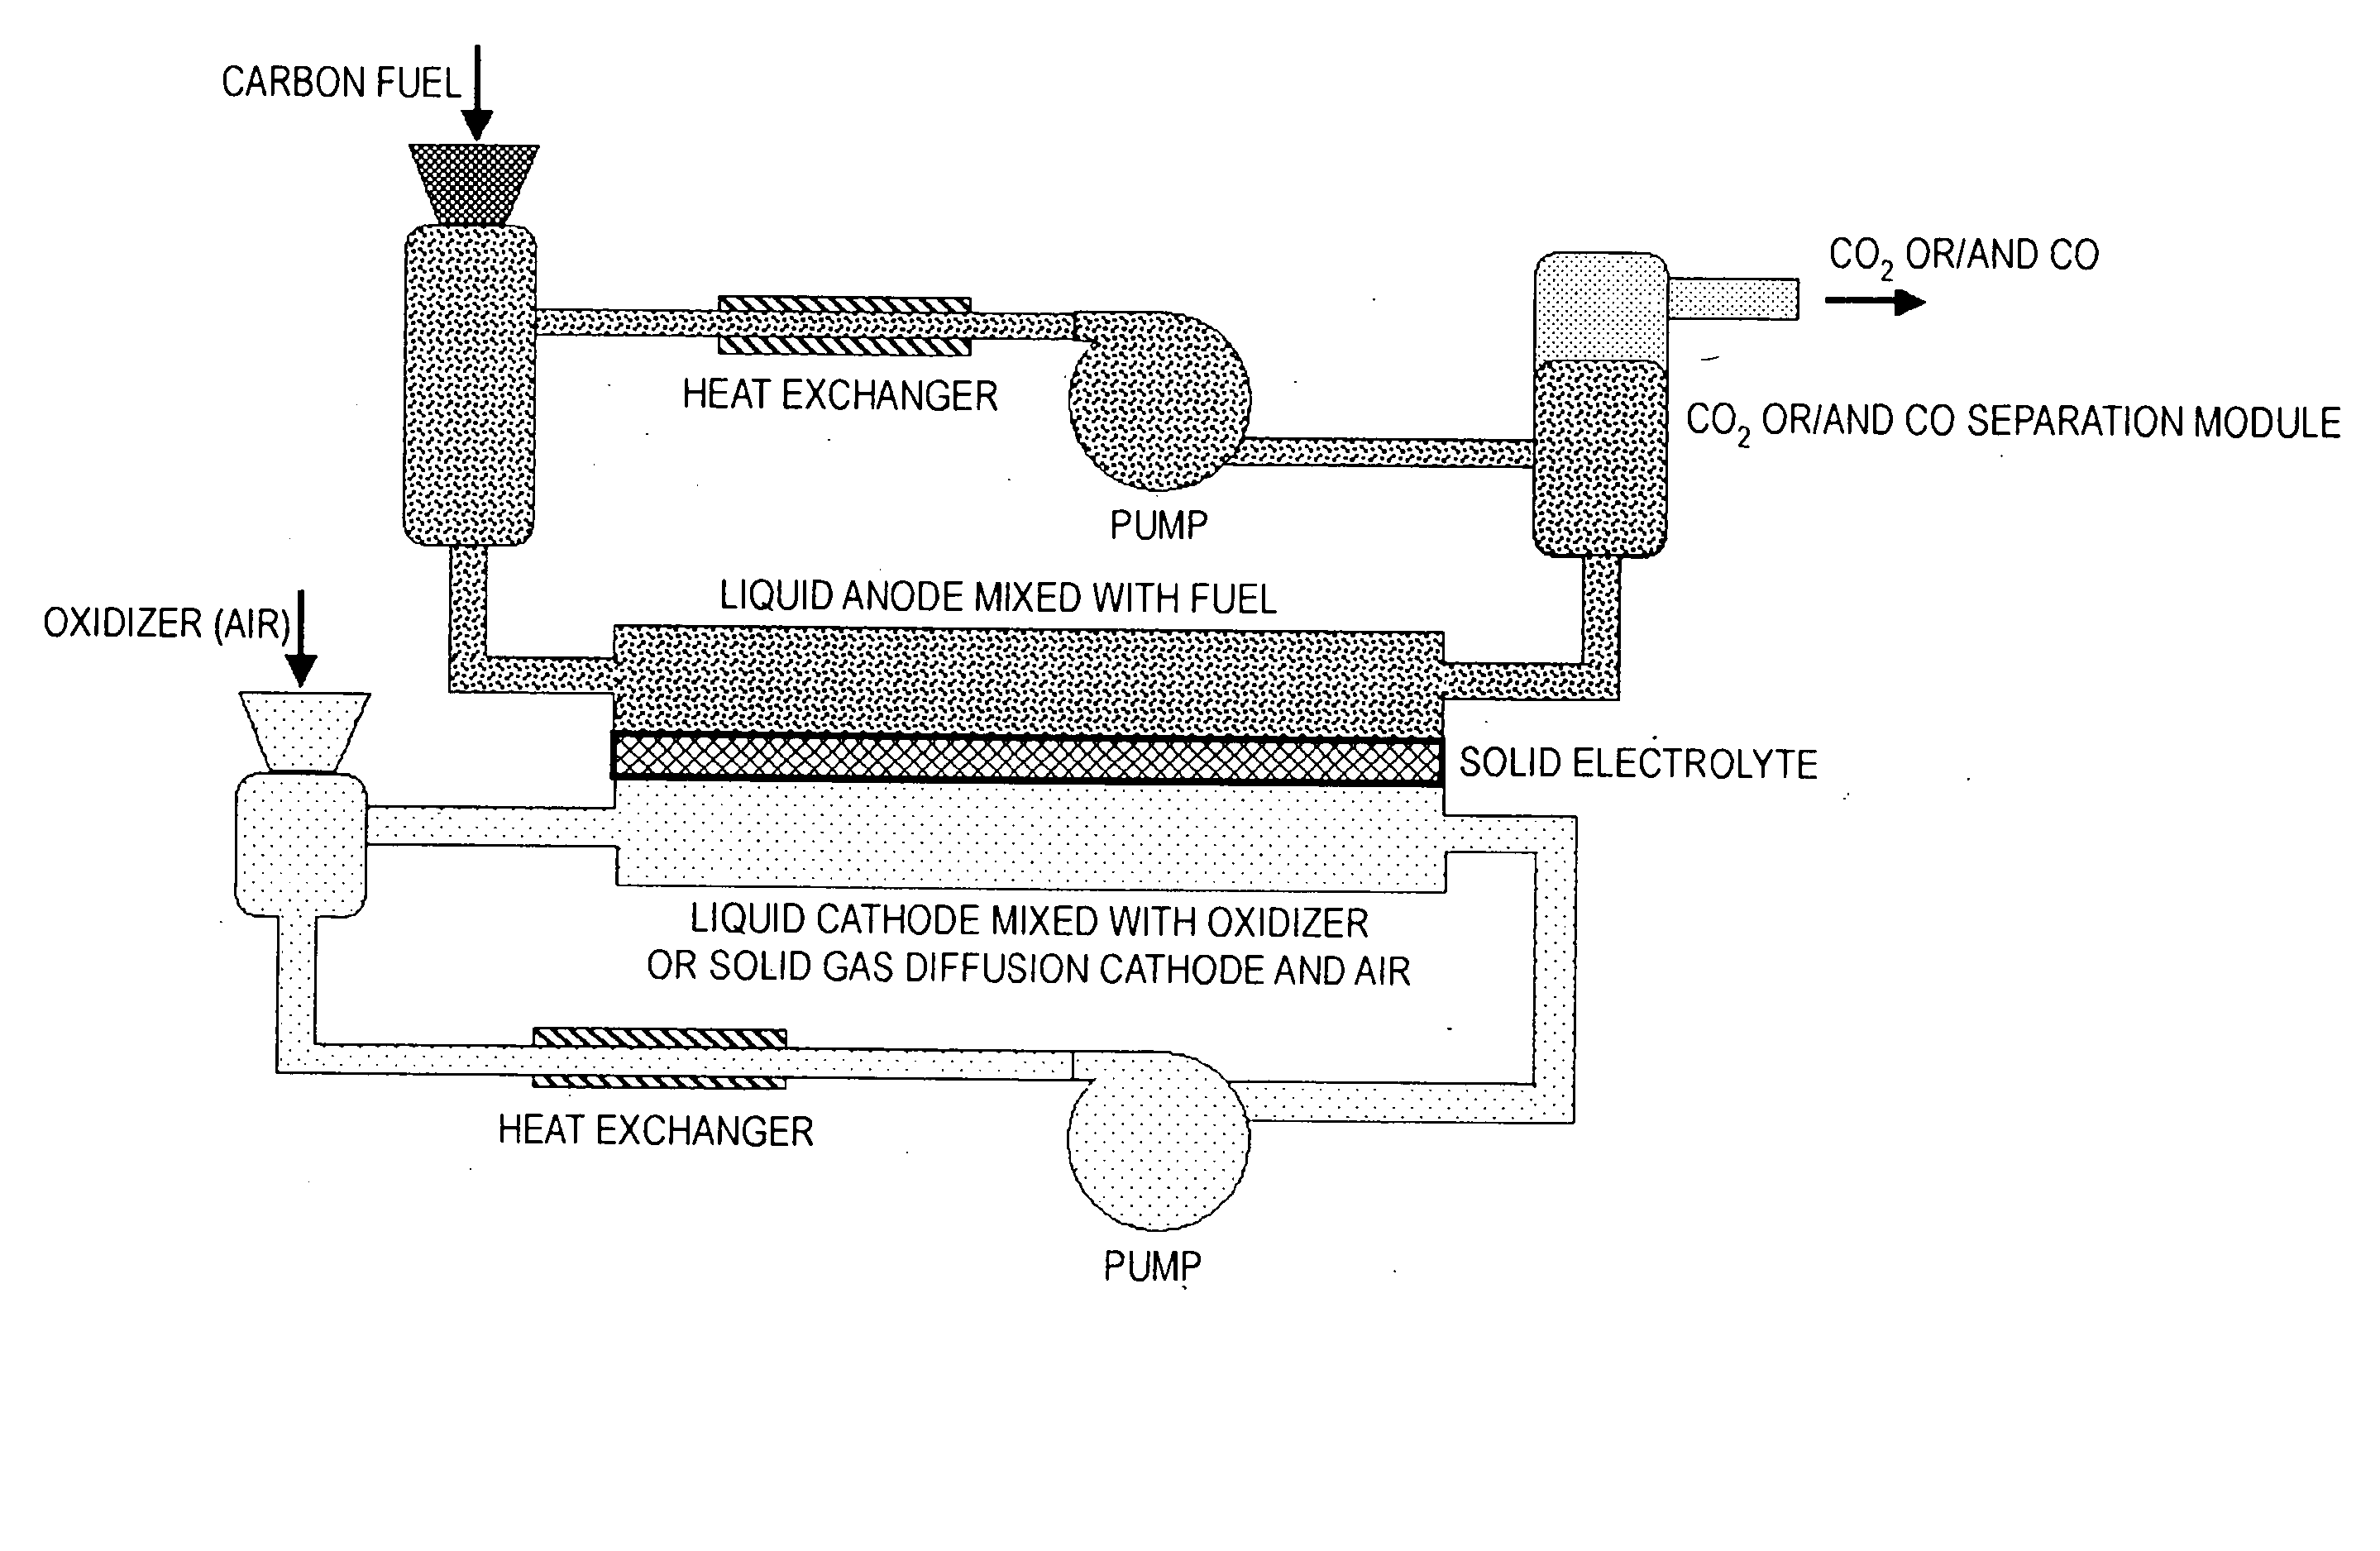 Liquid anode electrochemical cell